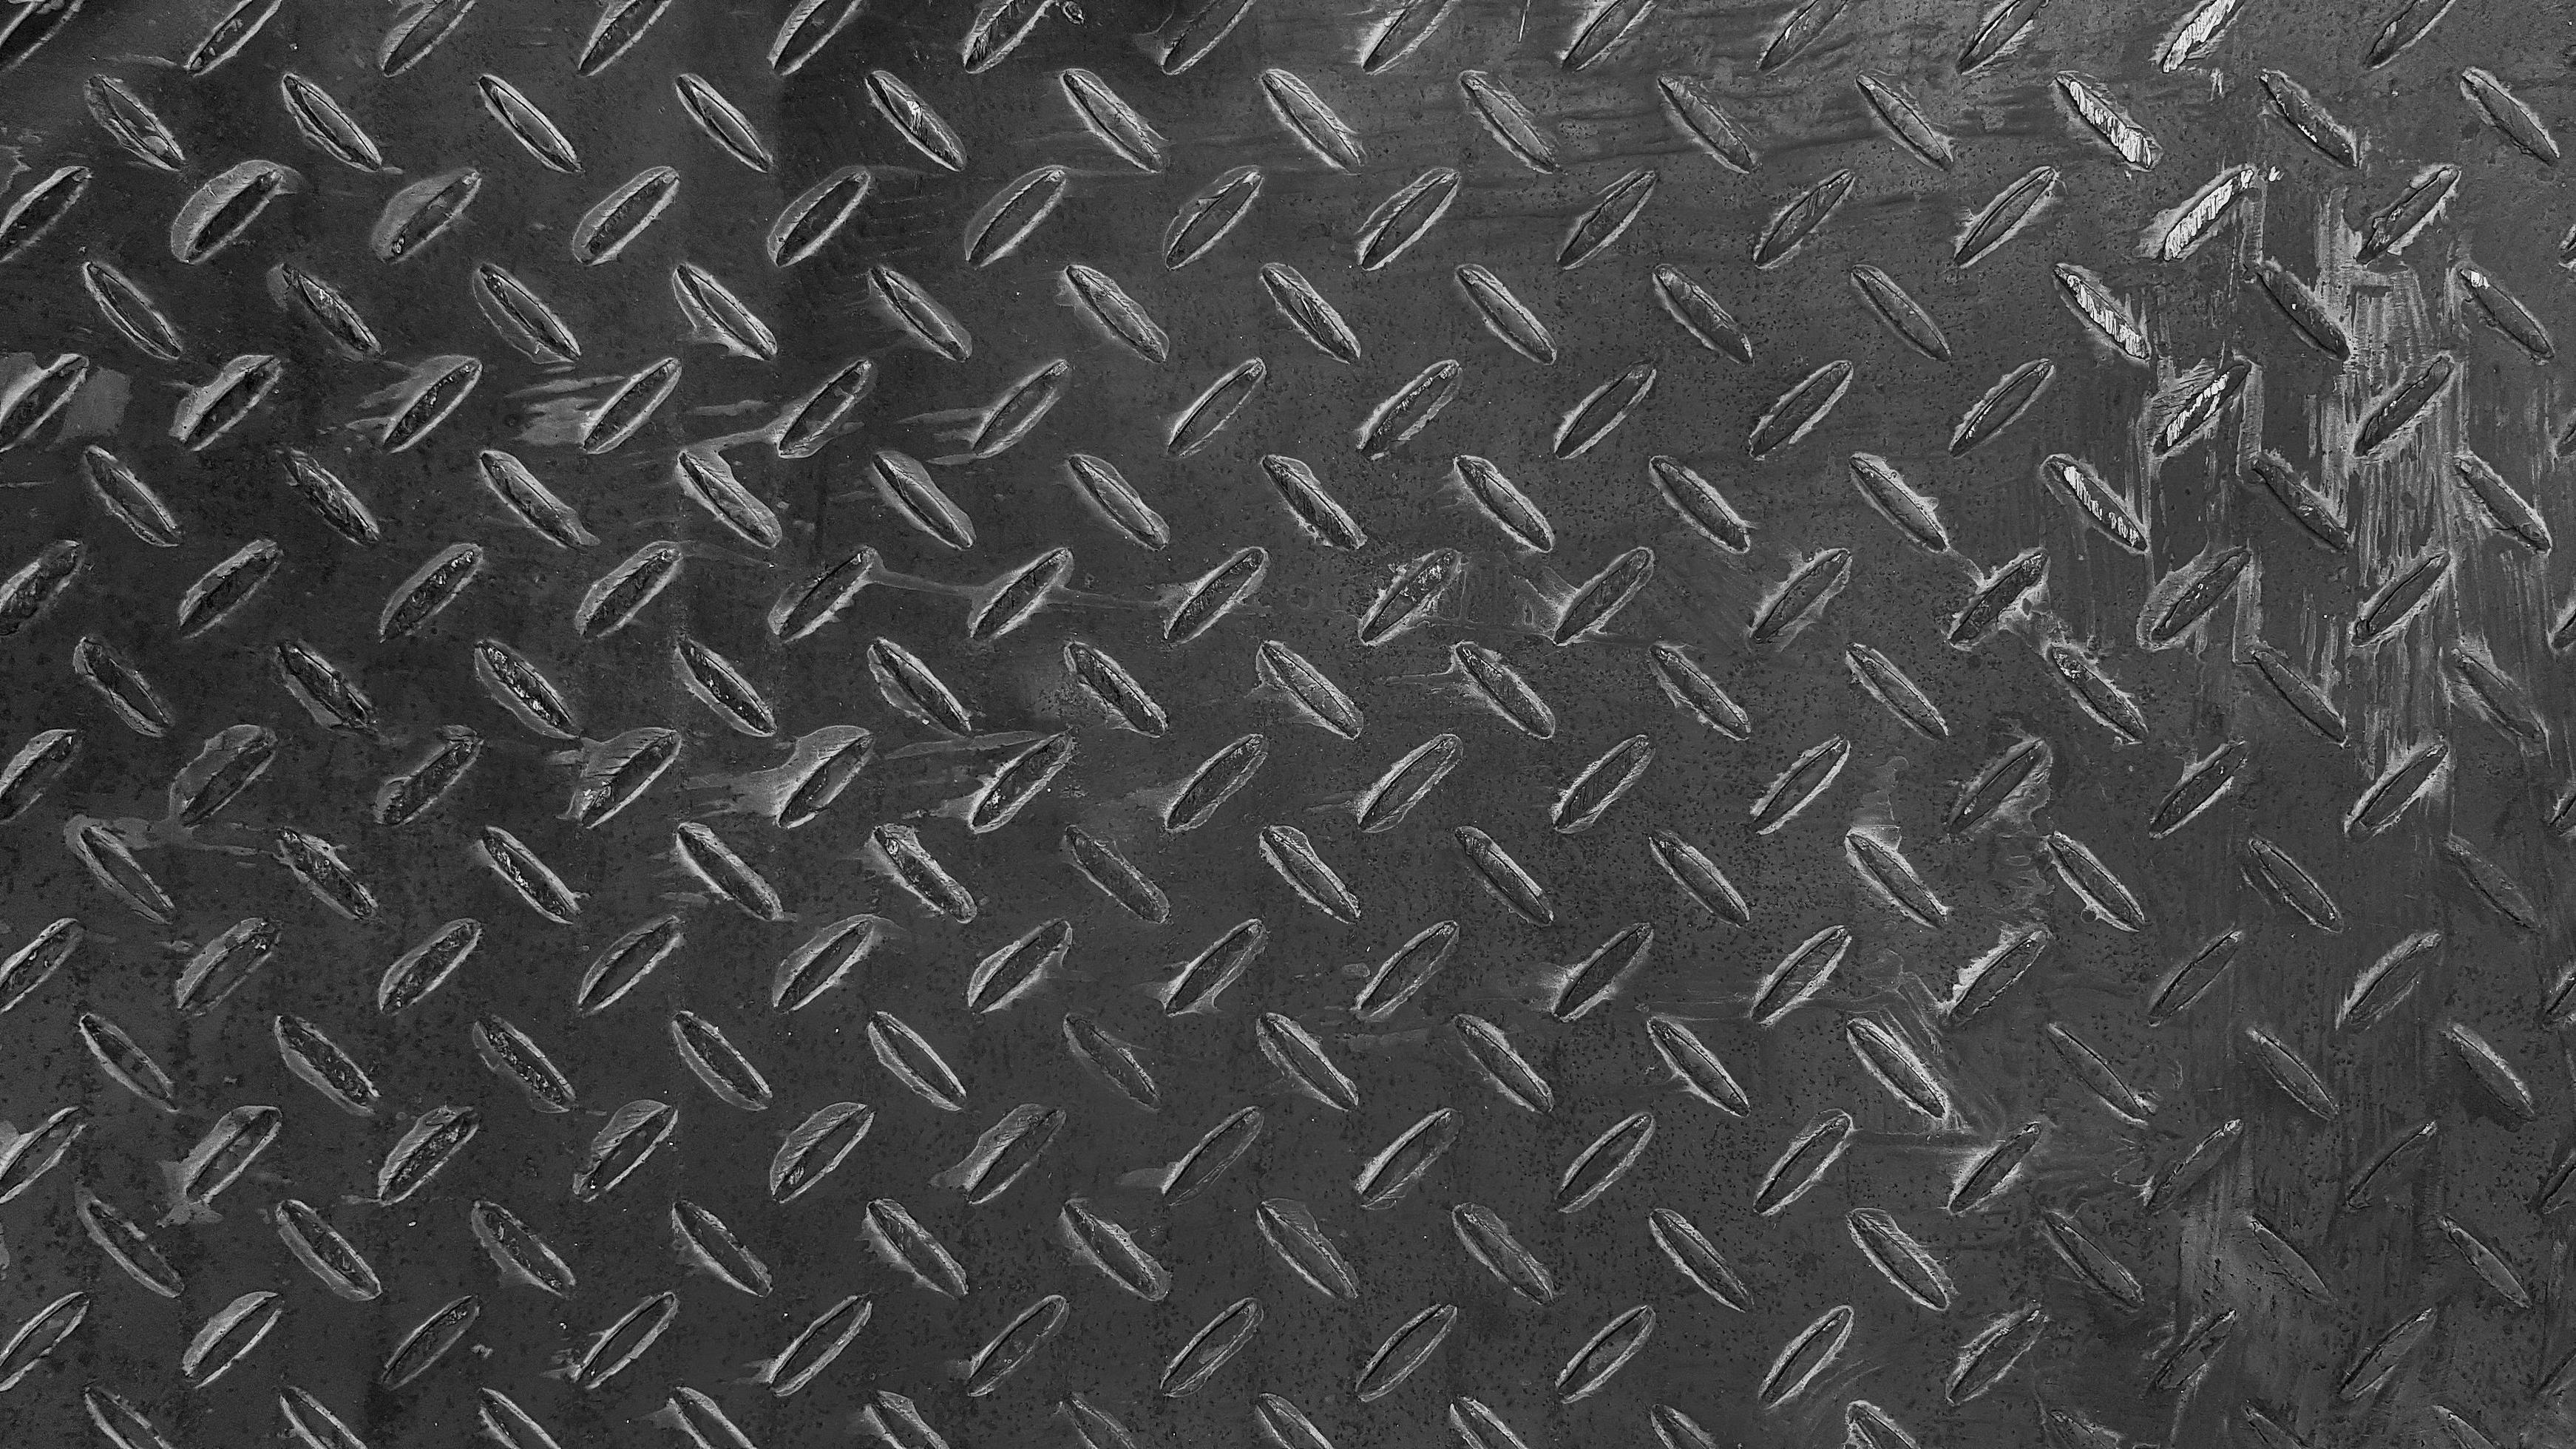 Black metal stainless steel texture background  stock photo 2034889   Crushpixel